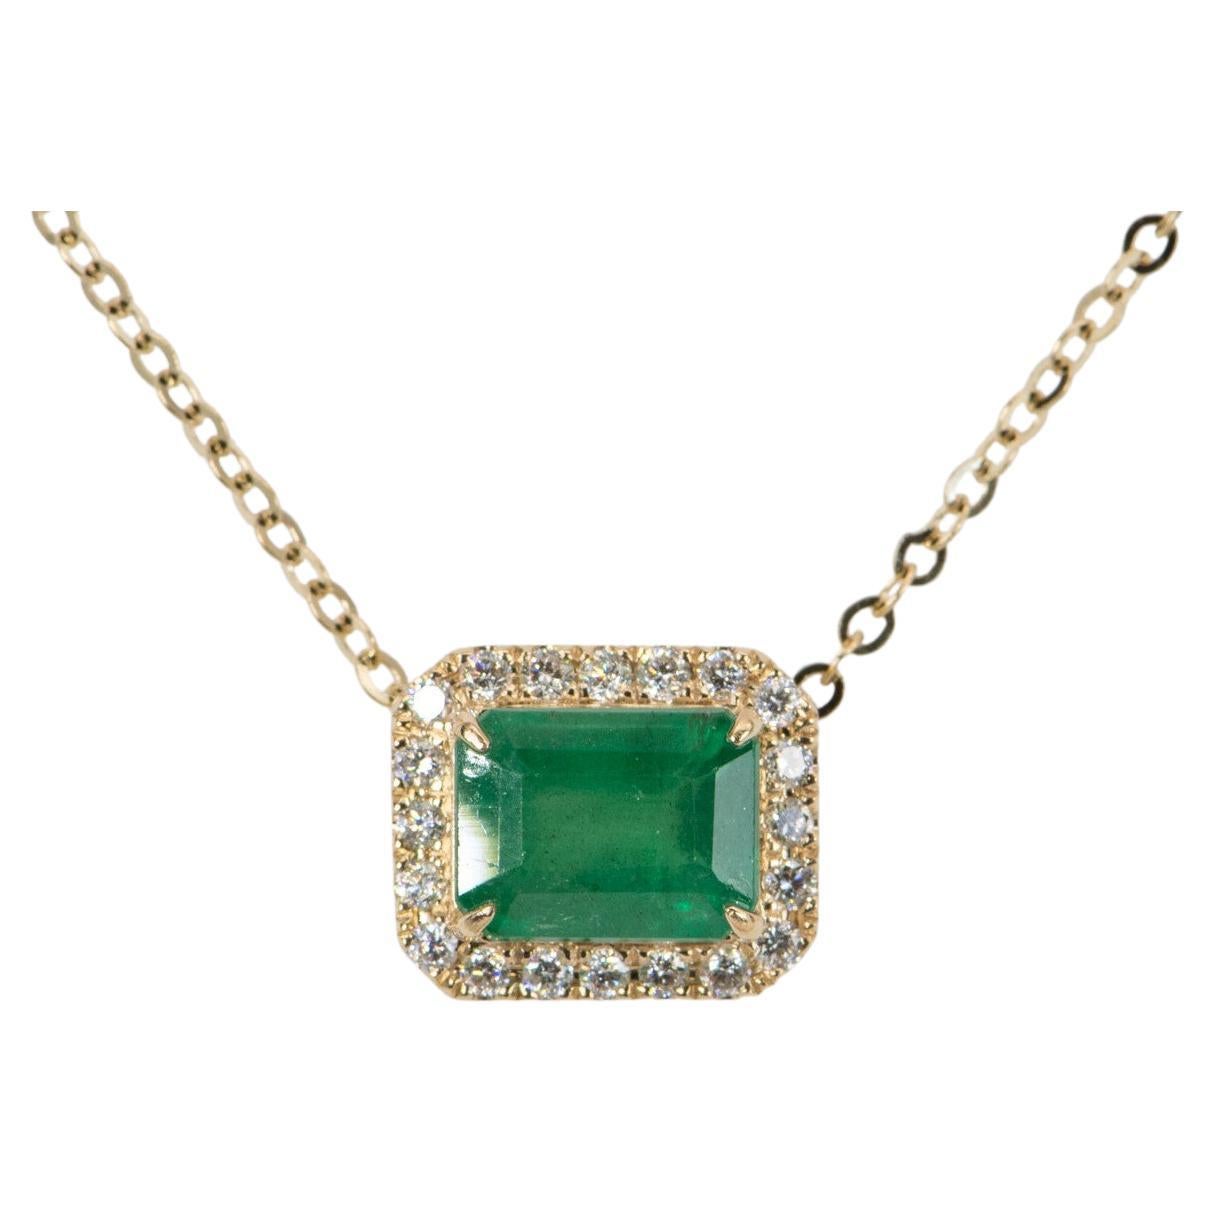 1.74ct Emerald with Diamond Halo 14K Yellow Gold Pendant Necklace Chain R4058 For Sale